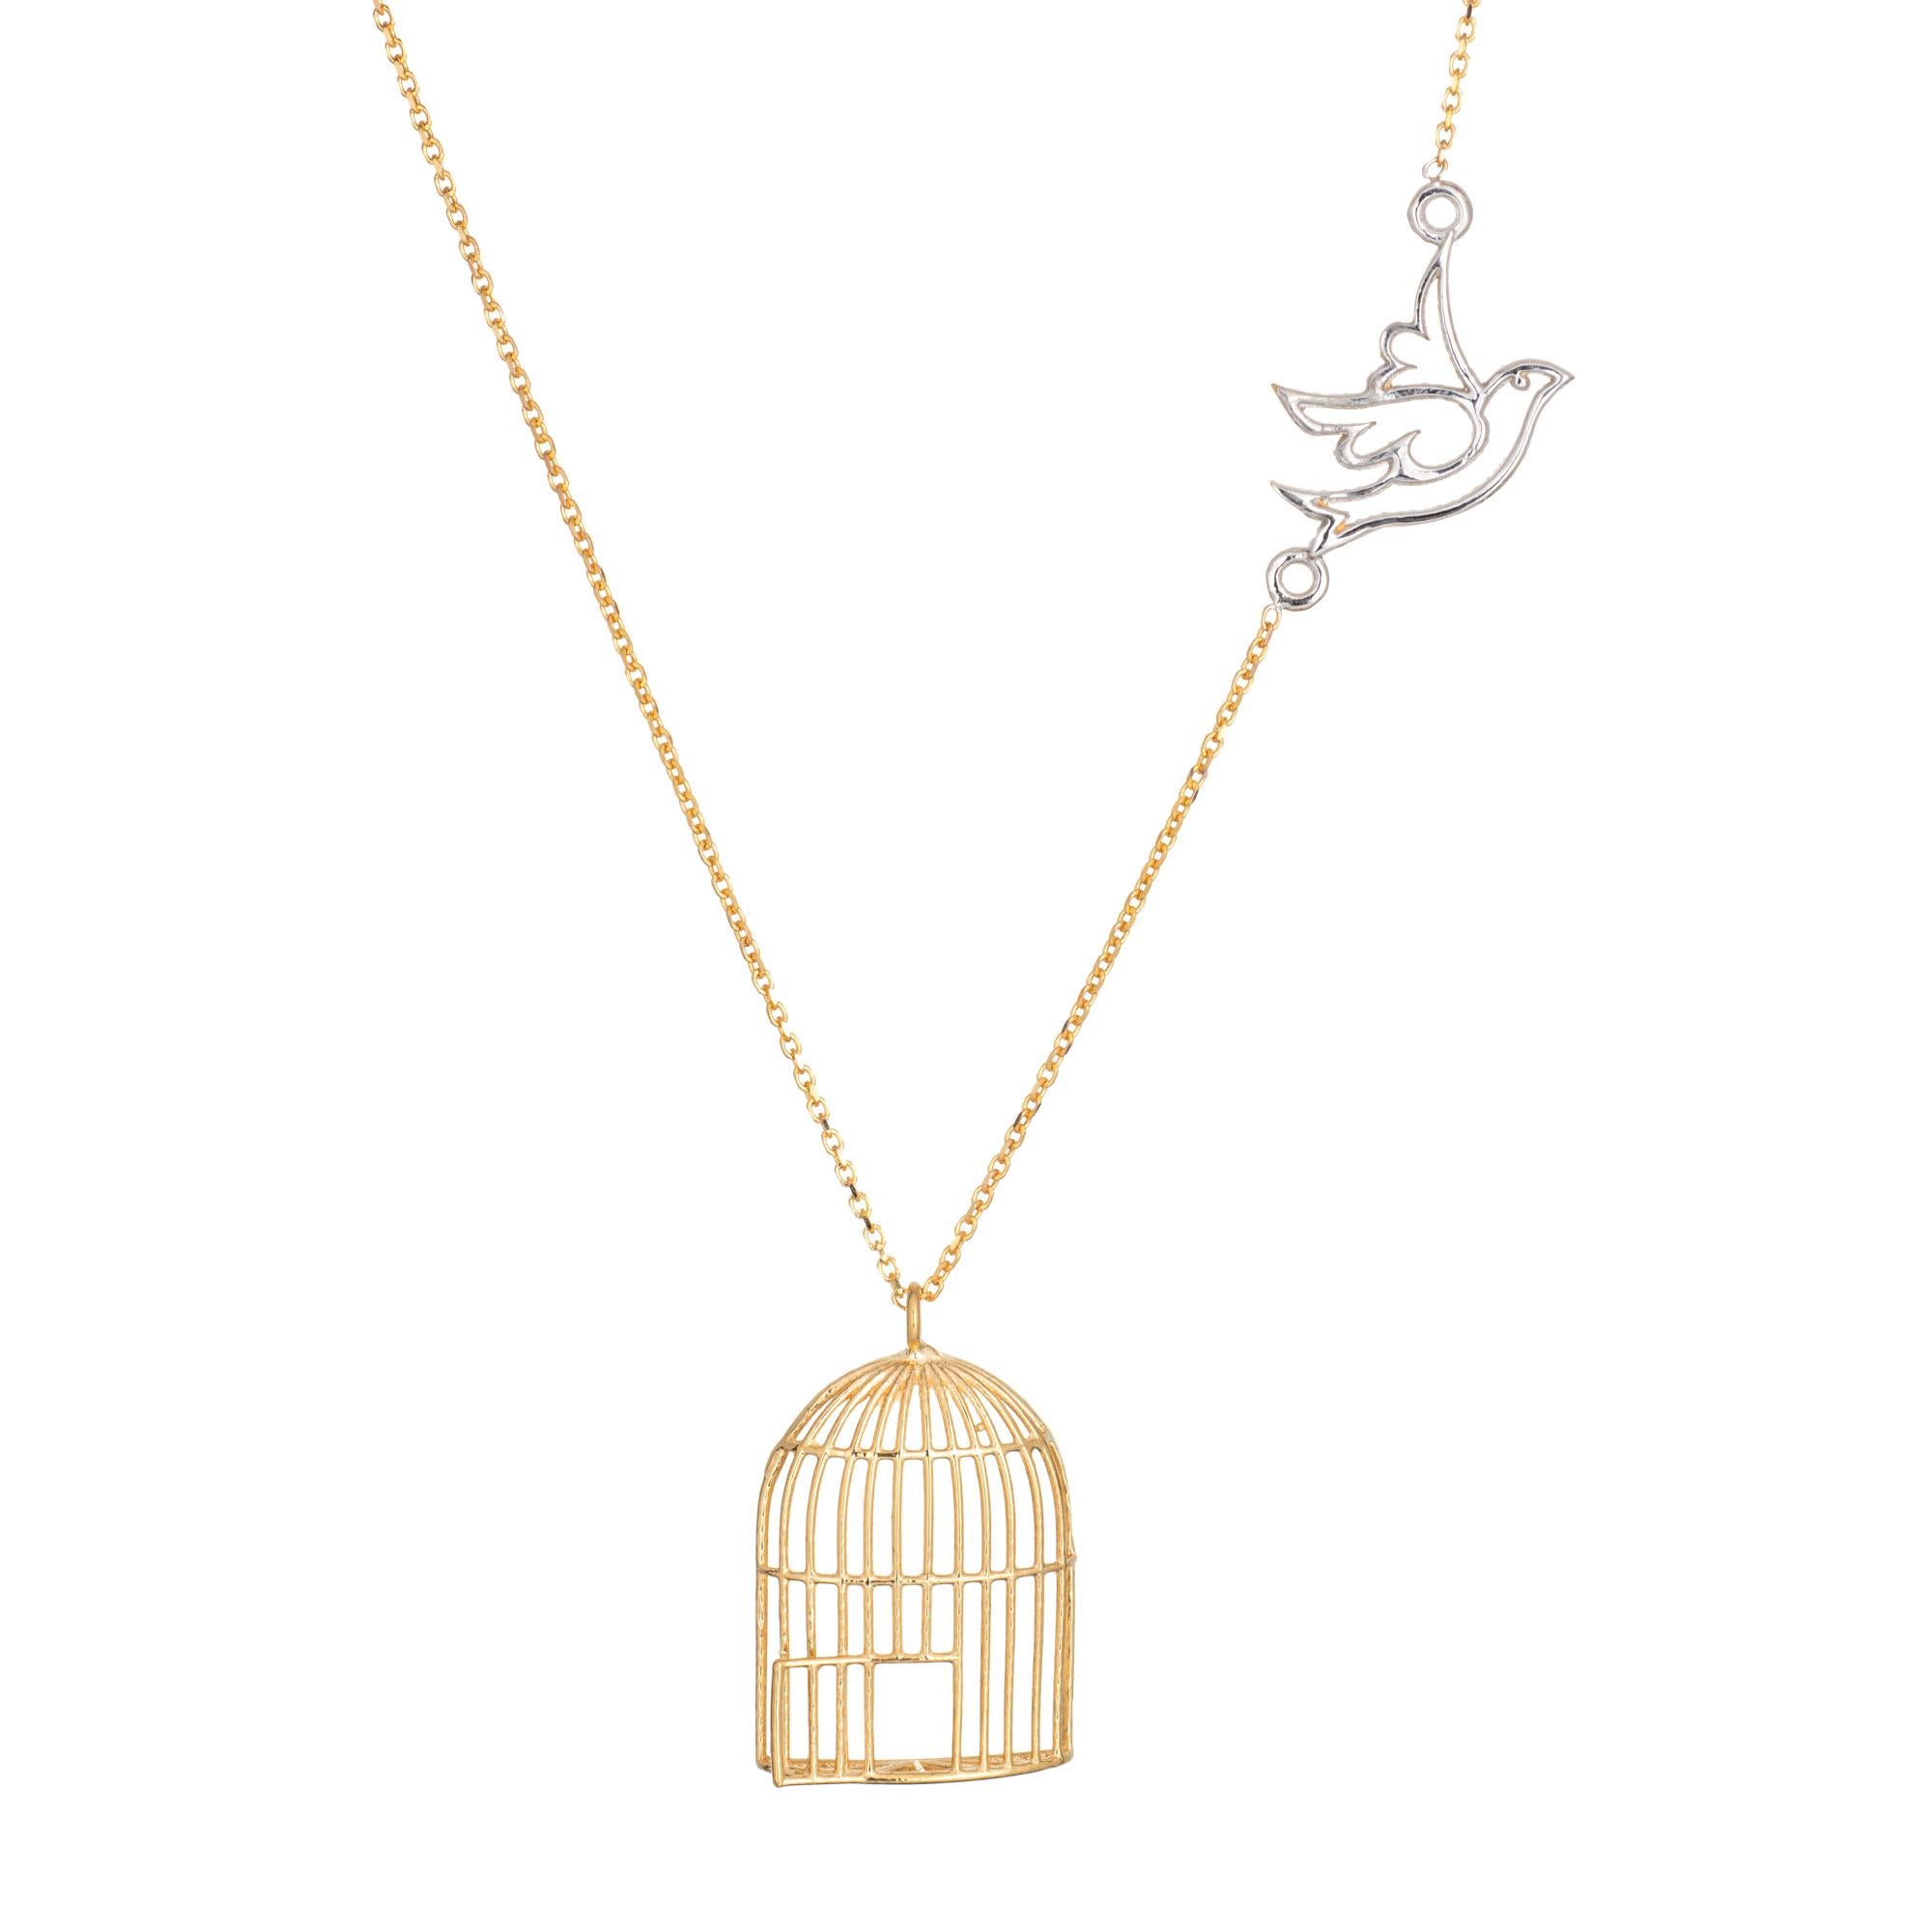 Bird Flying From Cage Necklace Estate 18k Yellow Gold 18